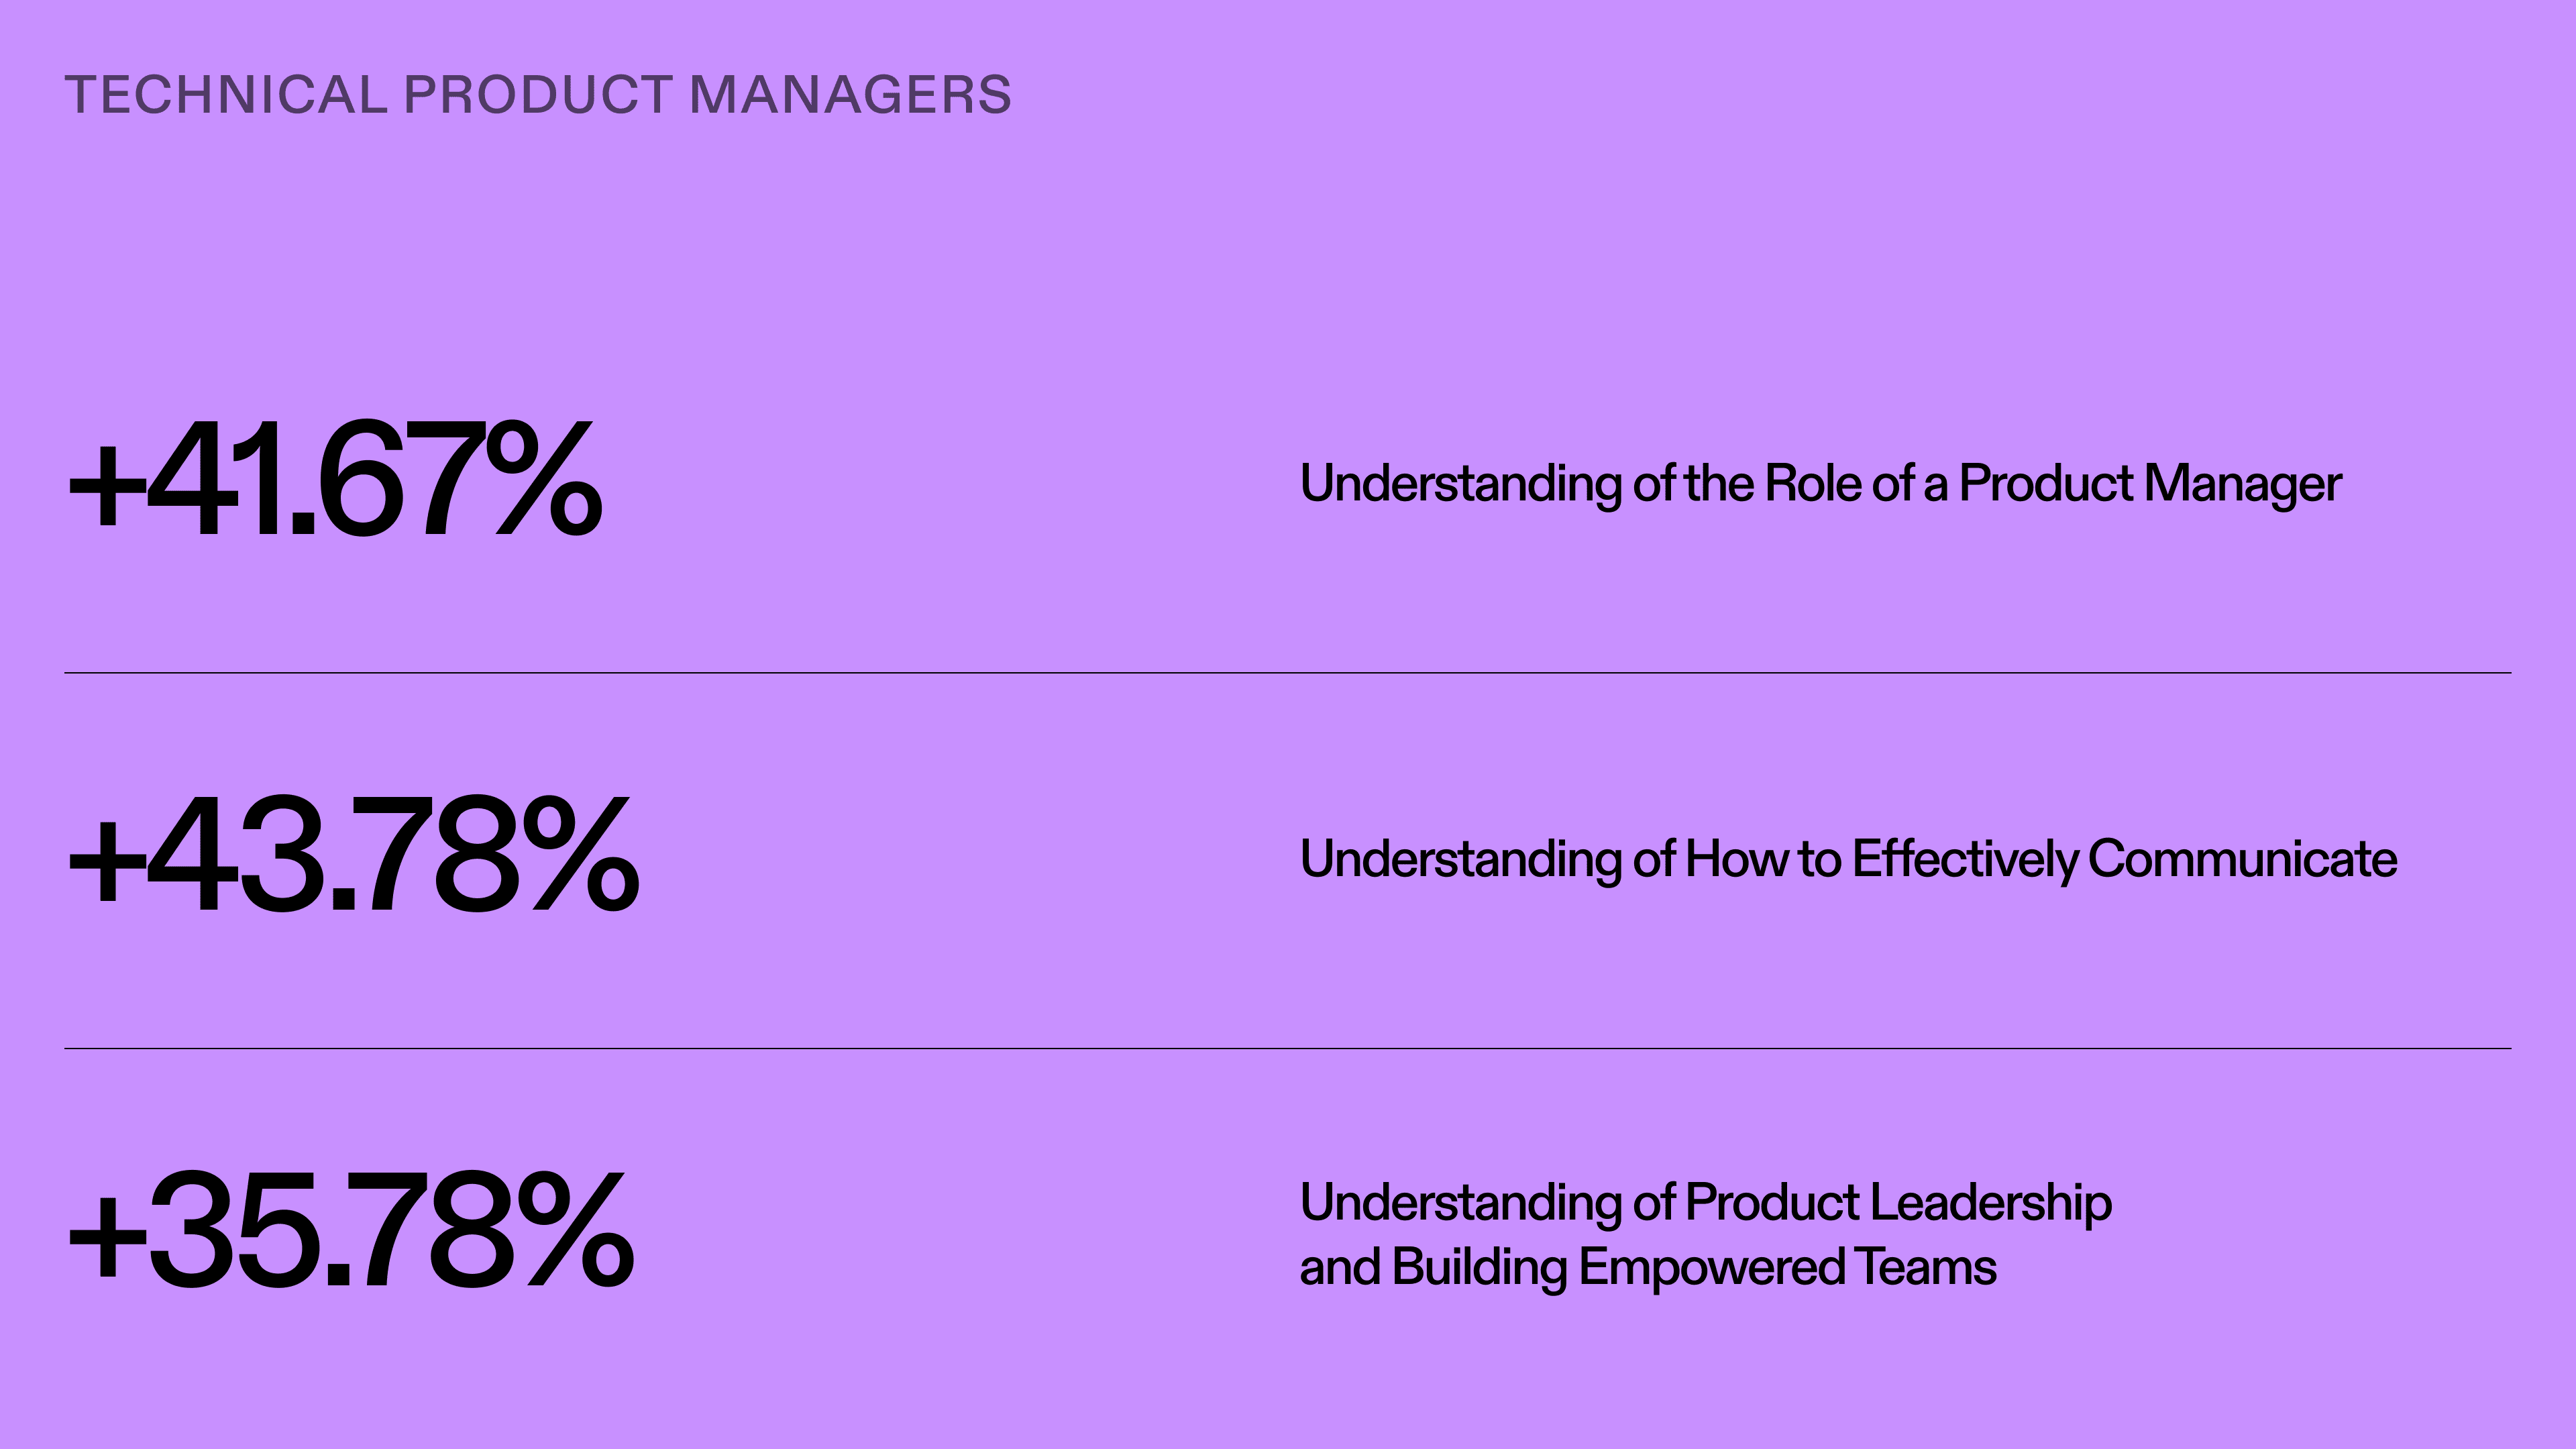 Graphic showing the increases in Technical Product Manager's understanding after the course. Understanding the role of a product manager increased by 41.67%. Understanding how to effectively communicate increased by 43.78%. Understanding product leadership and building empowered teams increased by 35.78%.